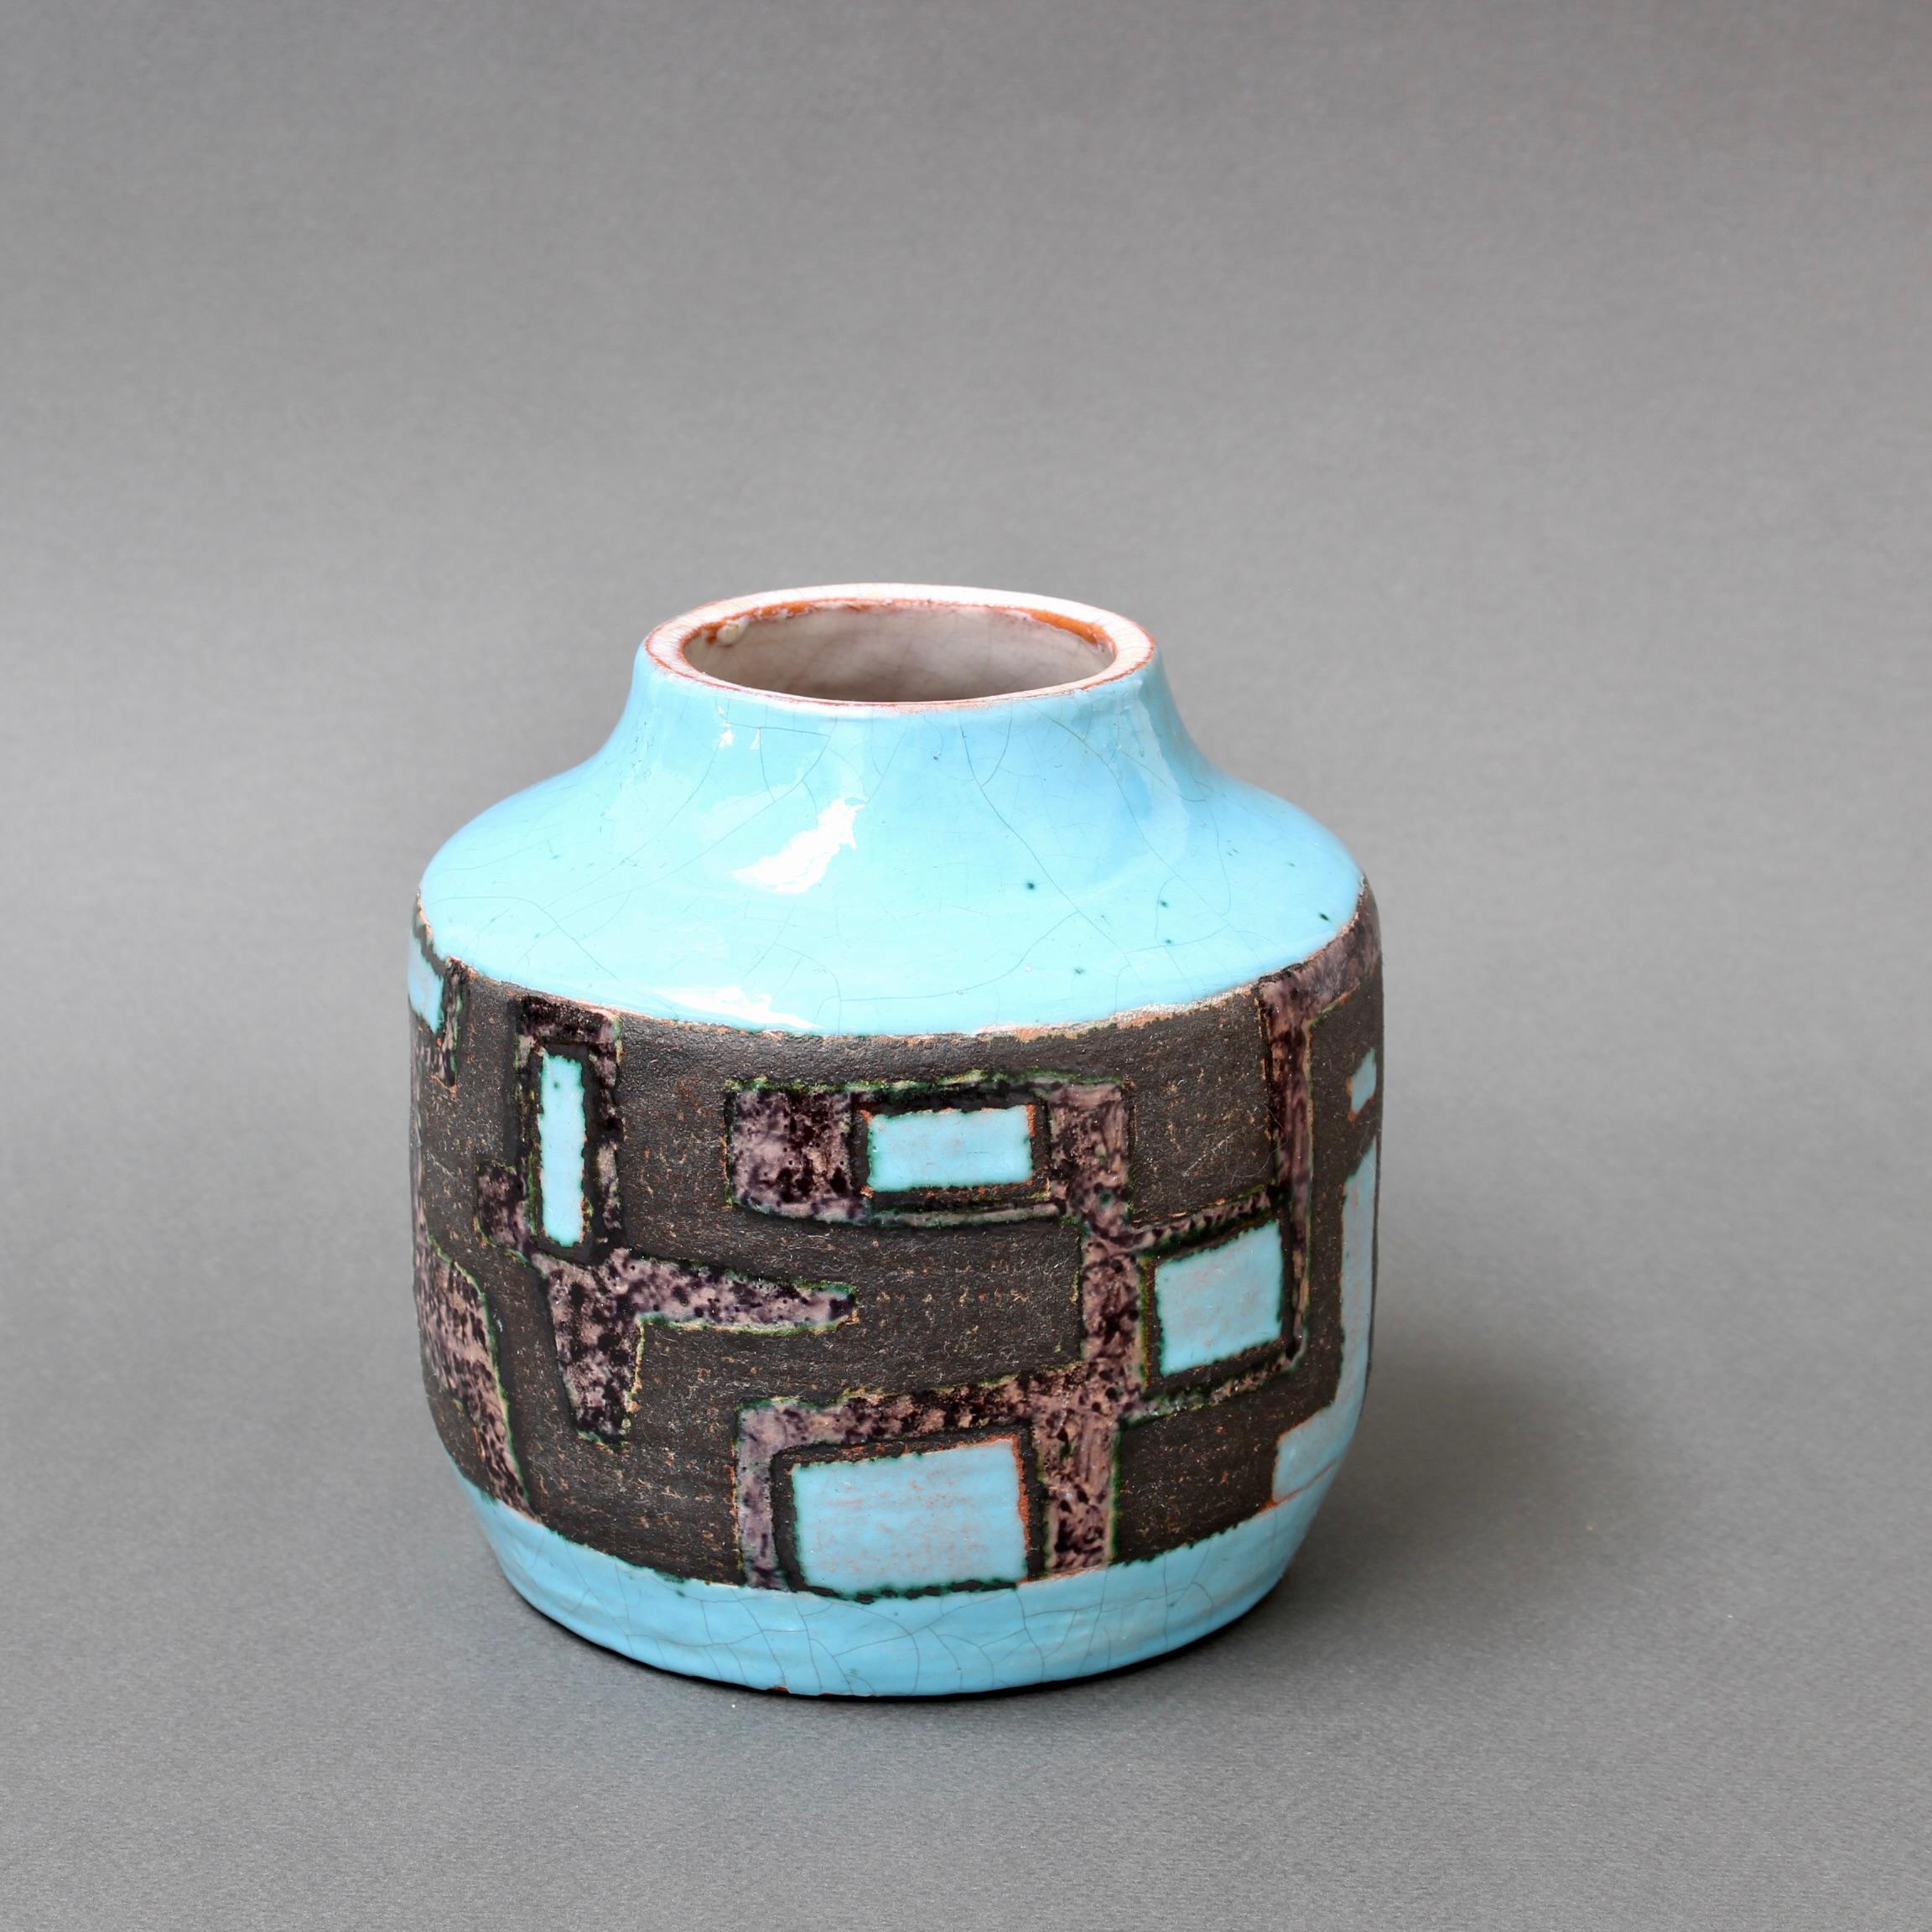 French decorative ceramic vase by Jean-Claude Courjault (1961). A diminutive piece with a narrow mouth and vibrant colour sets this beautiful vase apart from his other, more usual, darker works. The piece was created with a delicate sky blue enamel